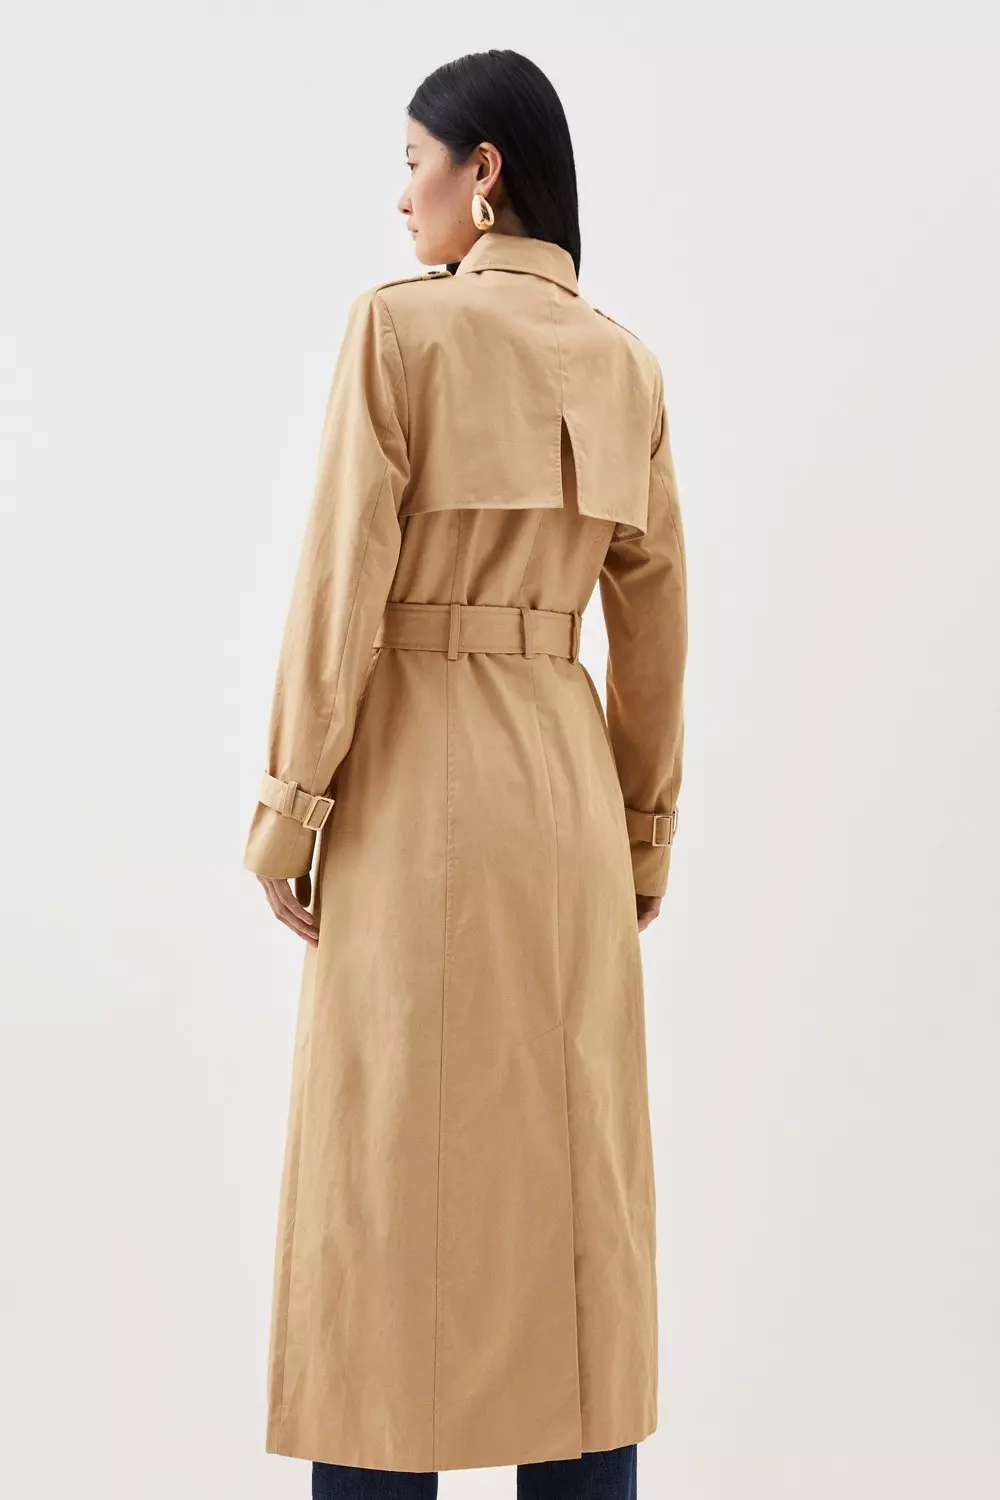 Prettygarden Belted Trench Looks Much More Expensive Than It Is